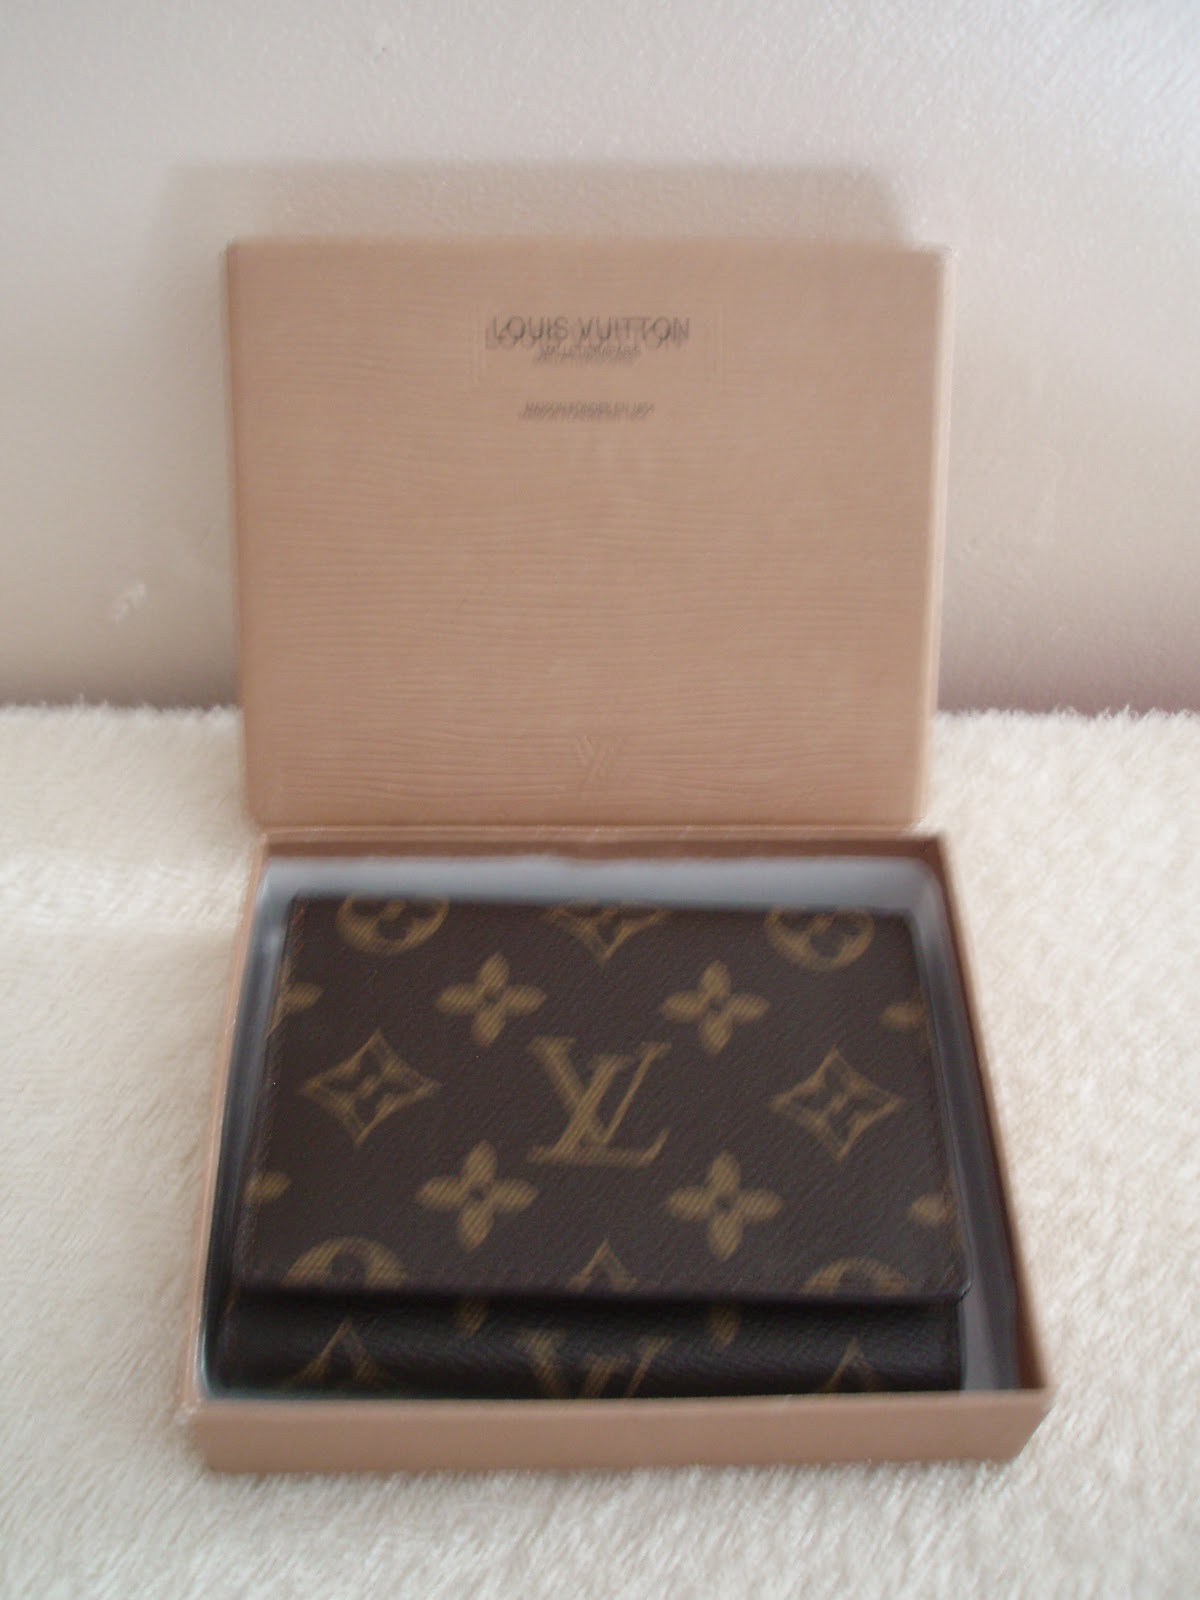 My new cardholder, got it as a gift : Louisvuitton